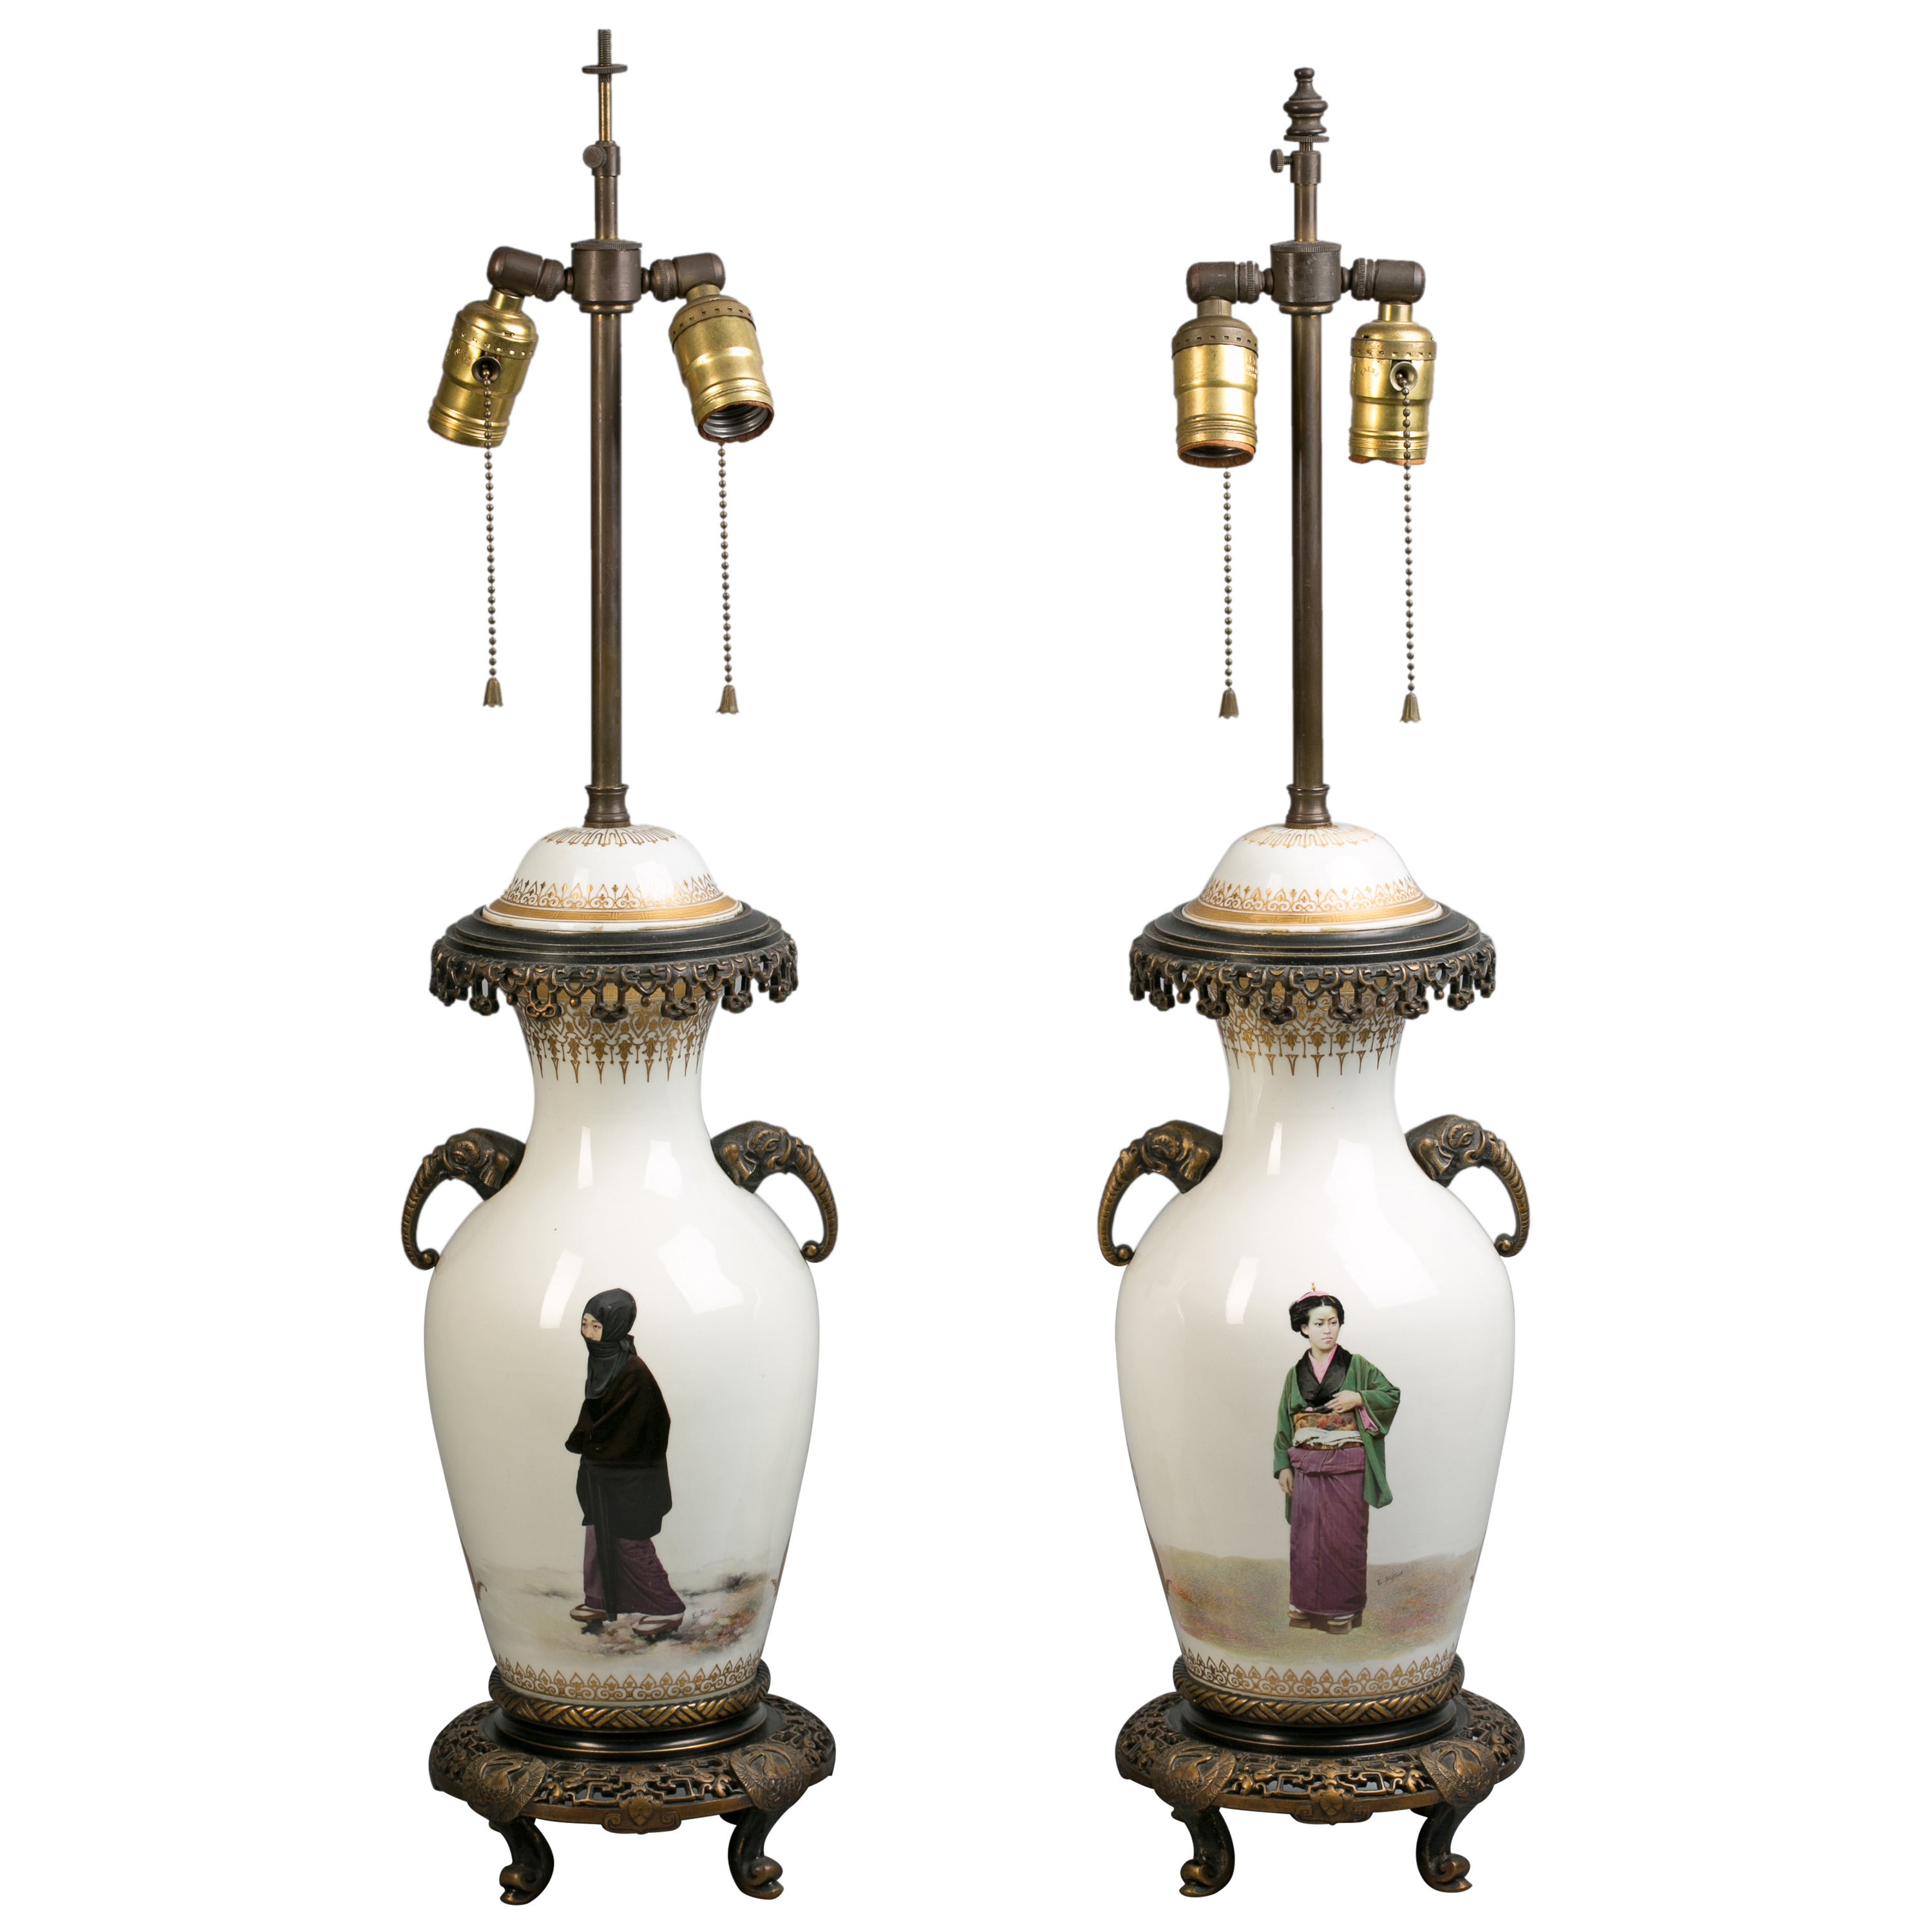 Pair of Bronze-Mounted French Porcelain Lamps, circa 1885